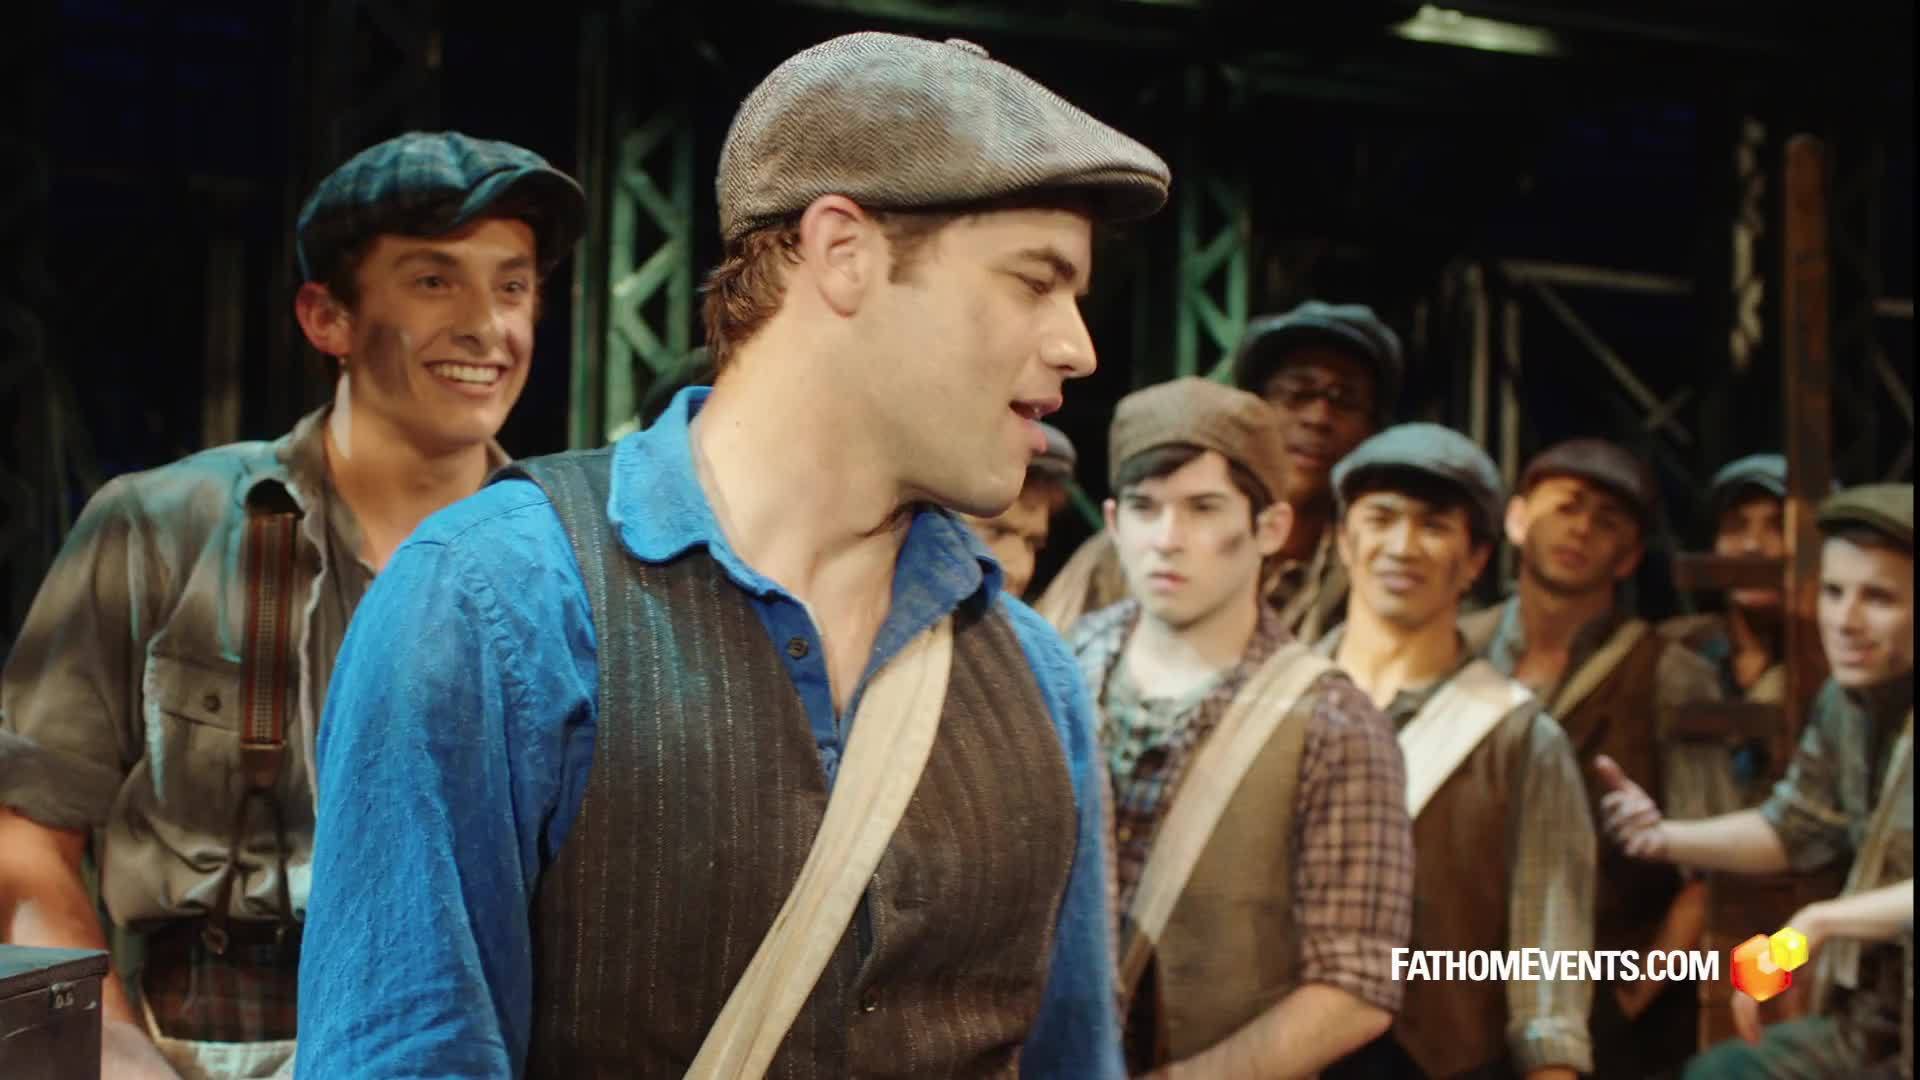 NEWSIES Movie Event: Official Trailer 2